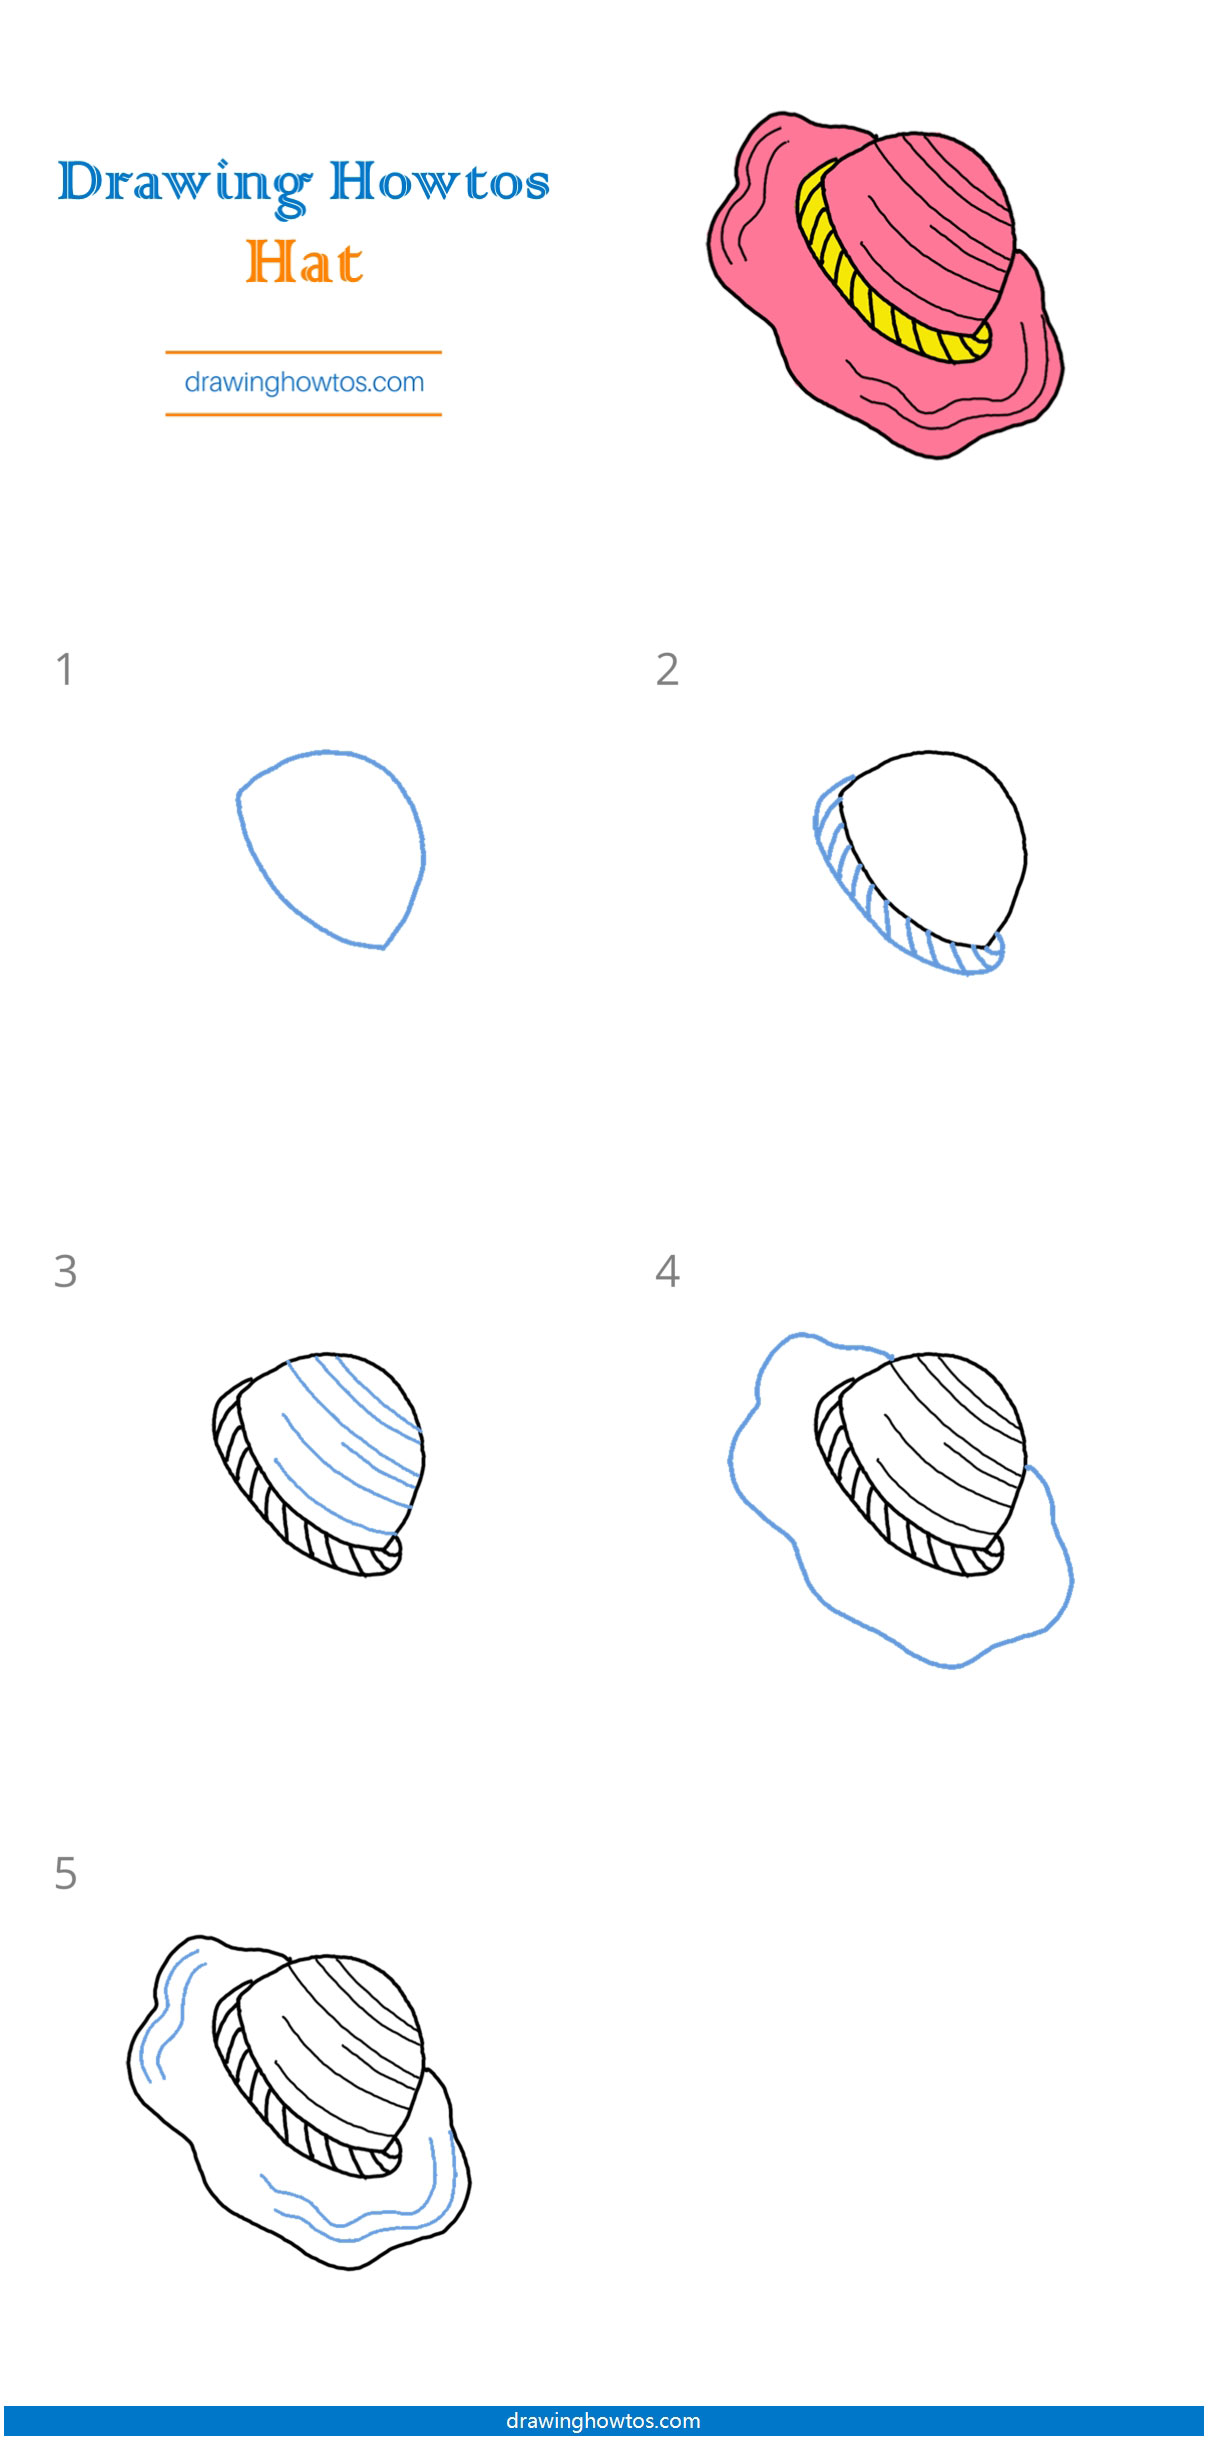 How to Draw a Cloche Hat Step by Step